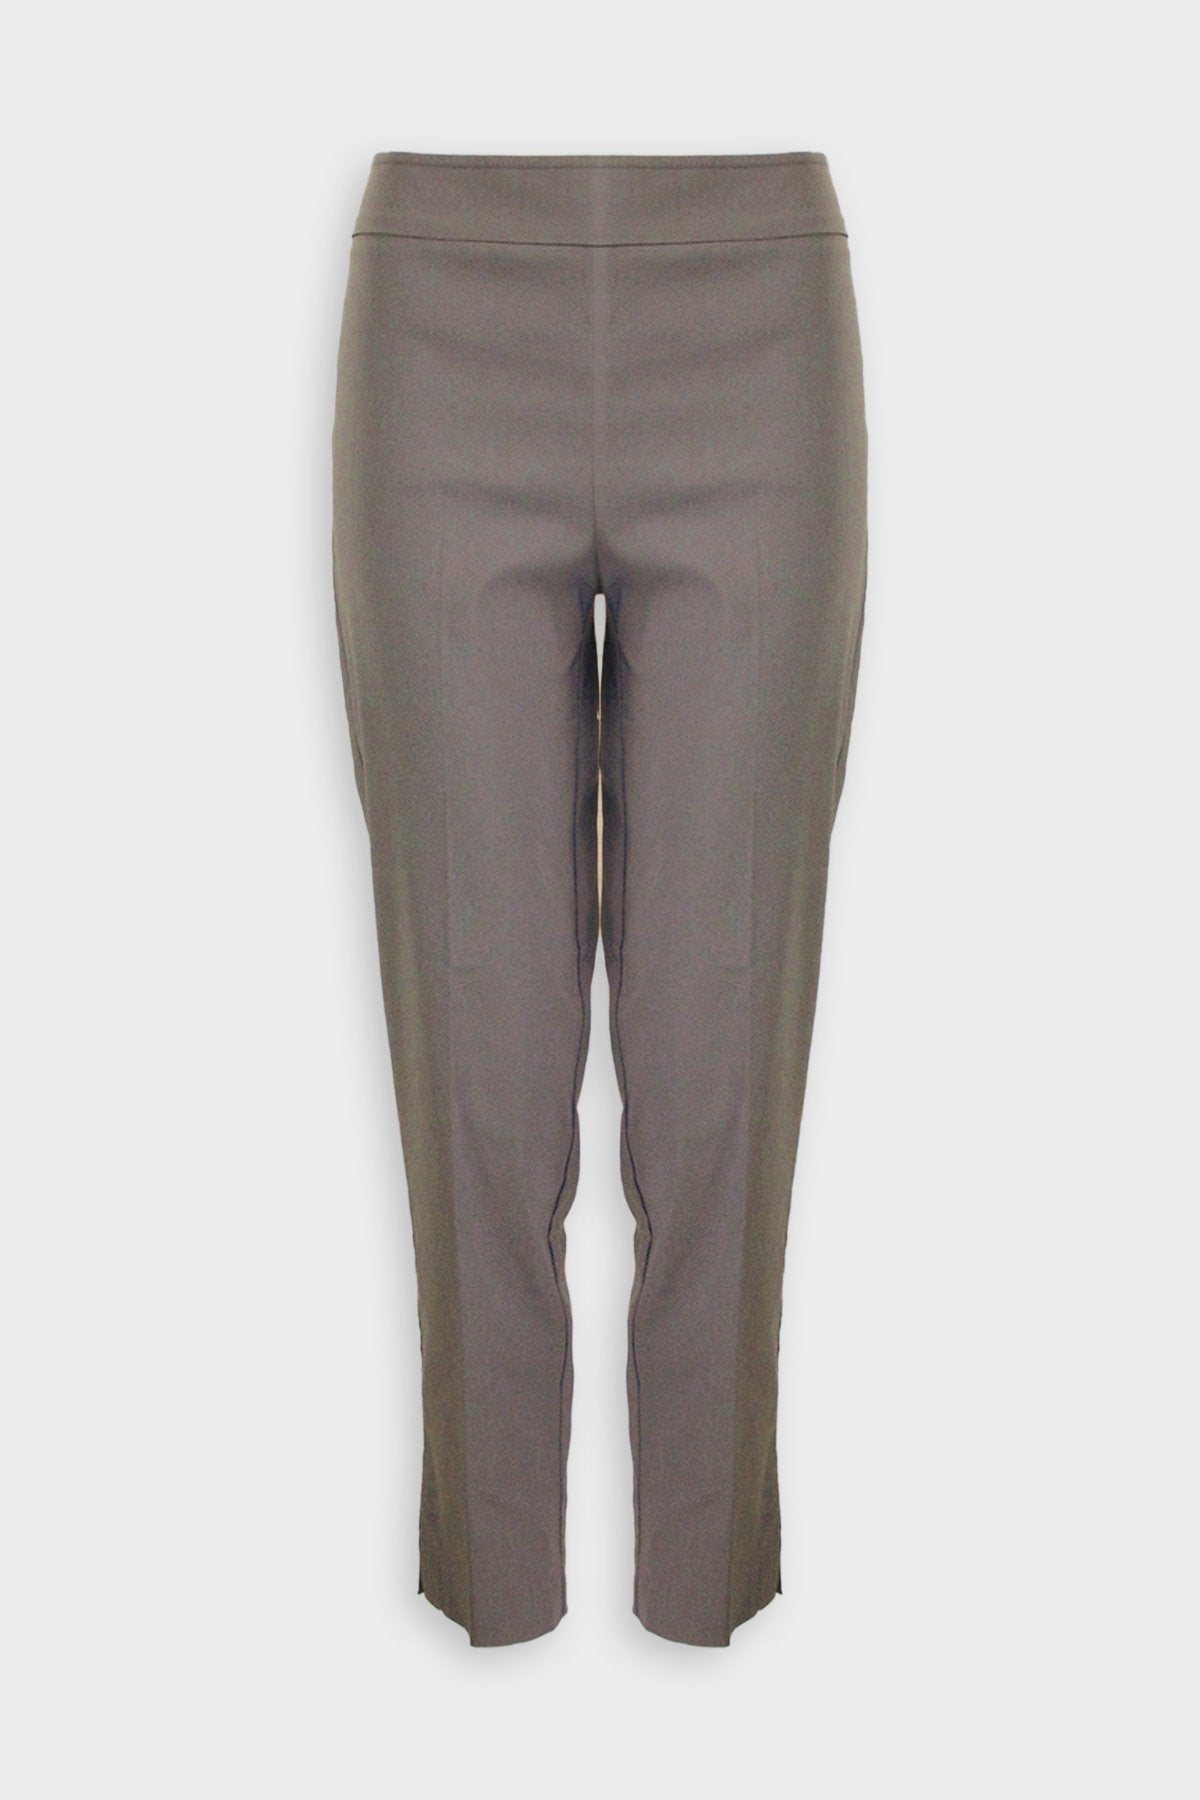 Pars Pant in Taupe - shop-olivia.com